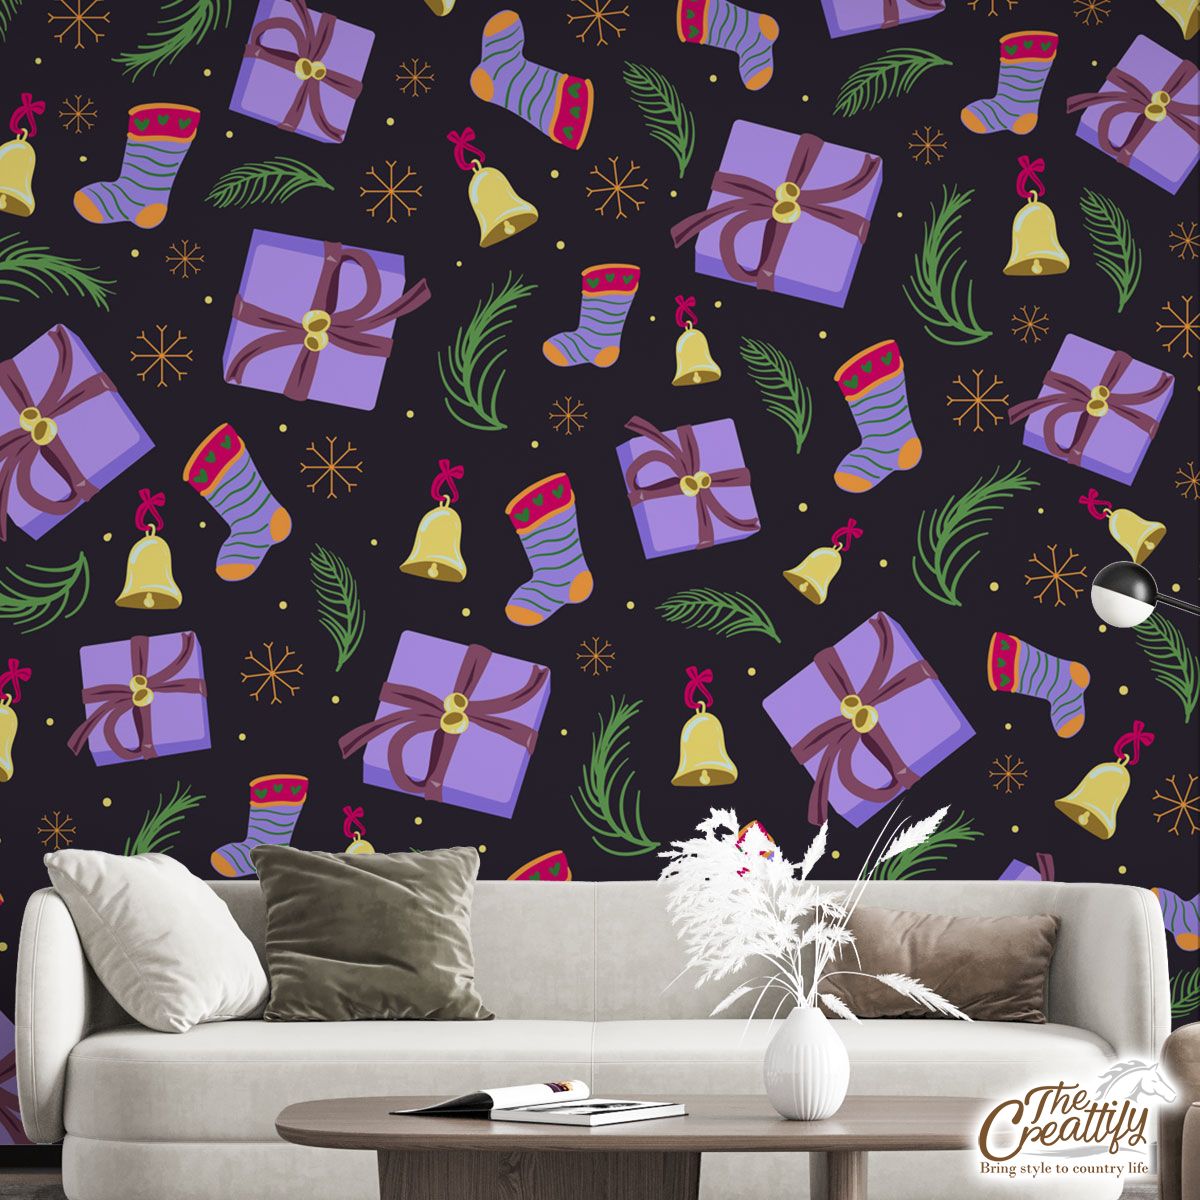 Purple Christmas Gifts And Socks With Bells On The Snowflake Dark Background Wall Mural